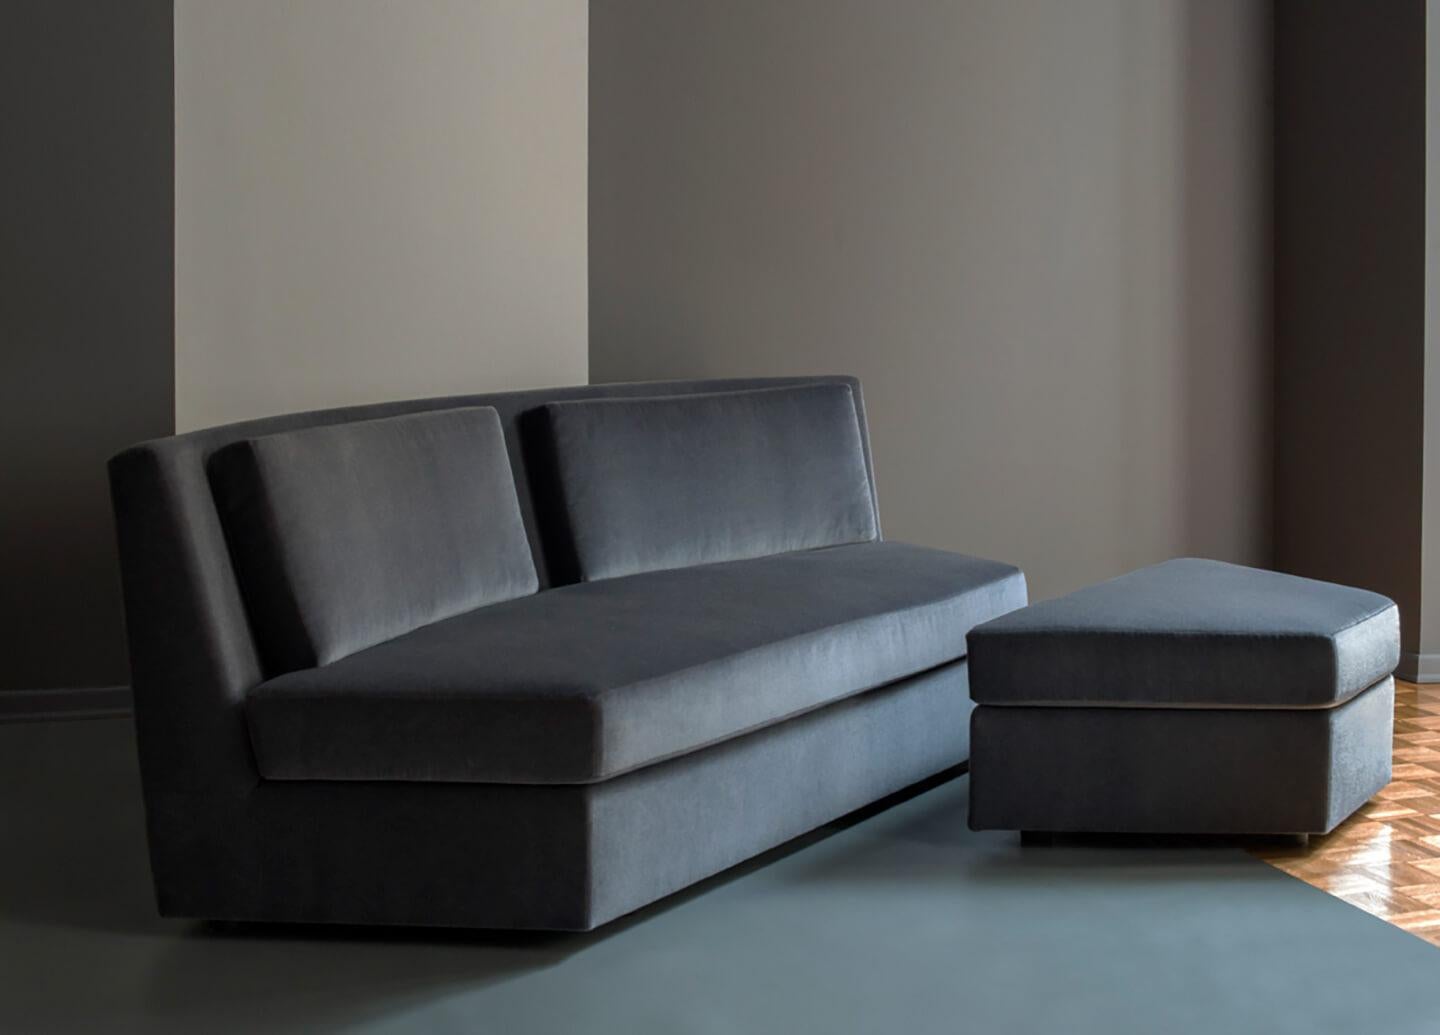 Alastair sofa by Marta Sala Editions
Dimensions: W 230 x D 96 x H 78 cm
Materials: Mohair velvet, polyurethane foam 
Variations of Material and Dimension are available.

Collection I consists in 14 types of models including sofas, armchairs,